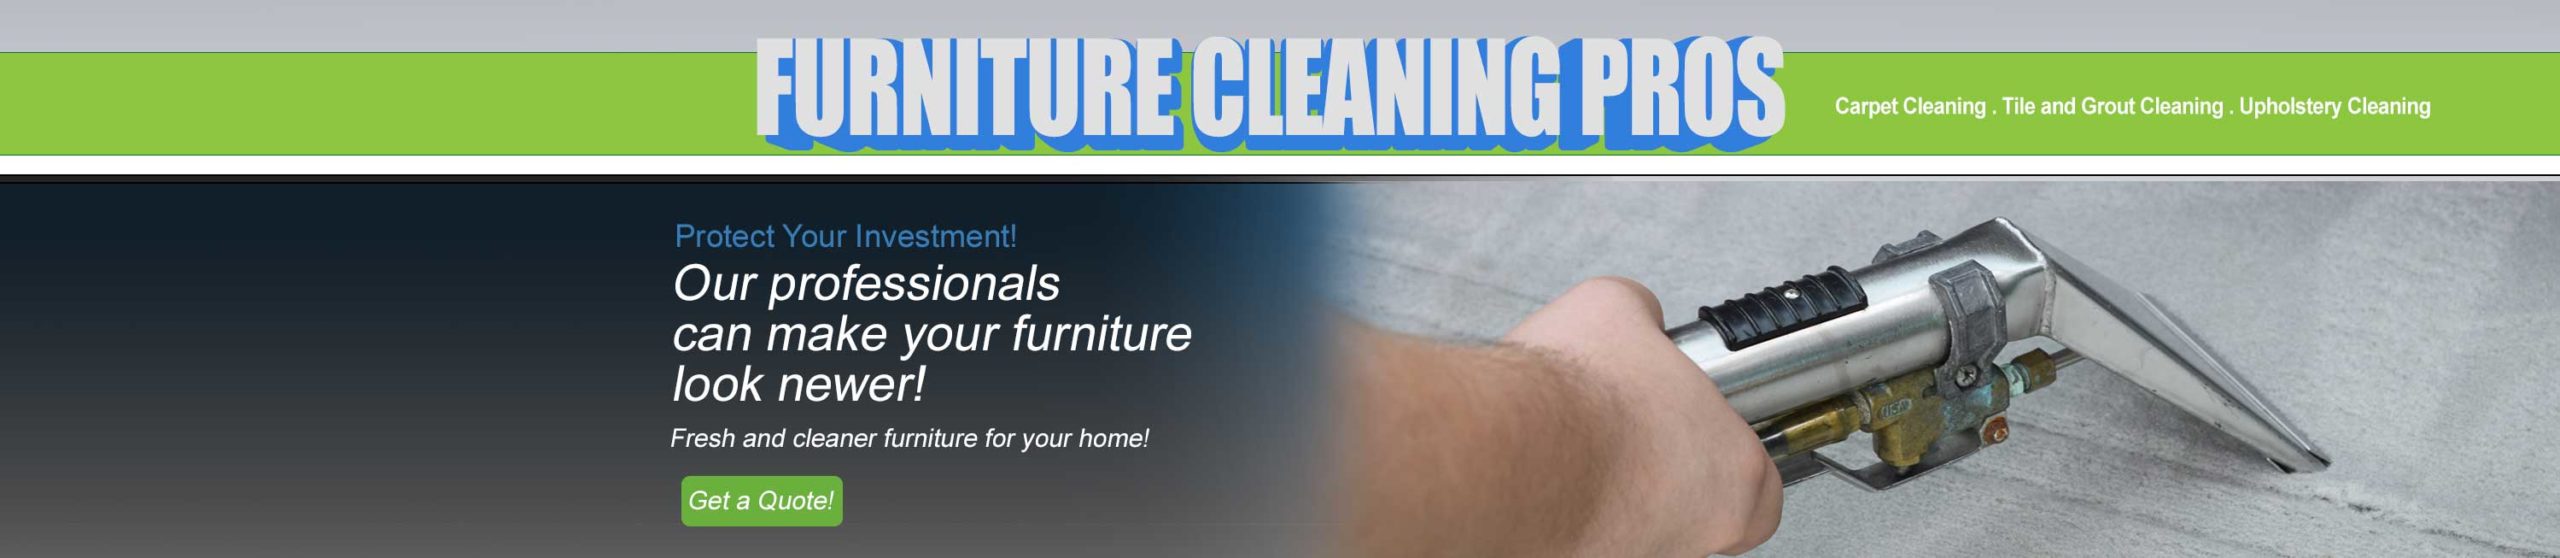 Furniture and upholstery cleaning in Queen Creek AZ